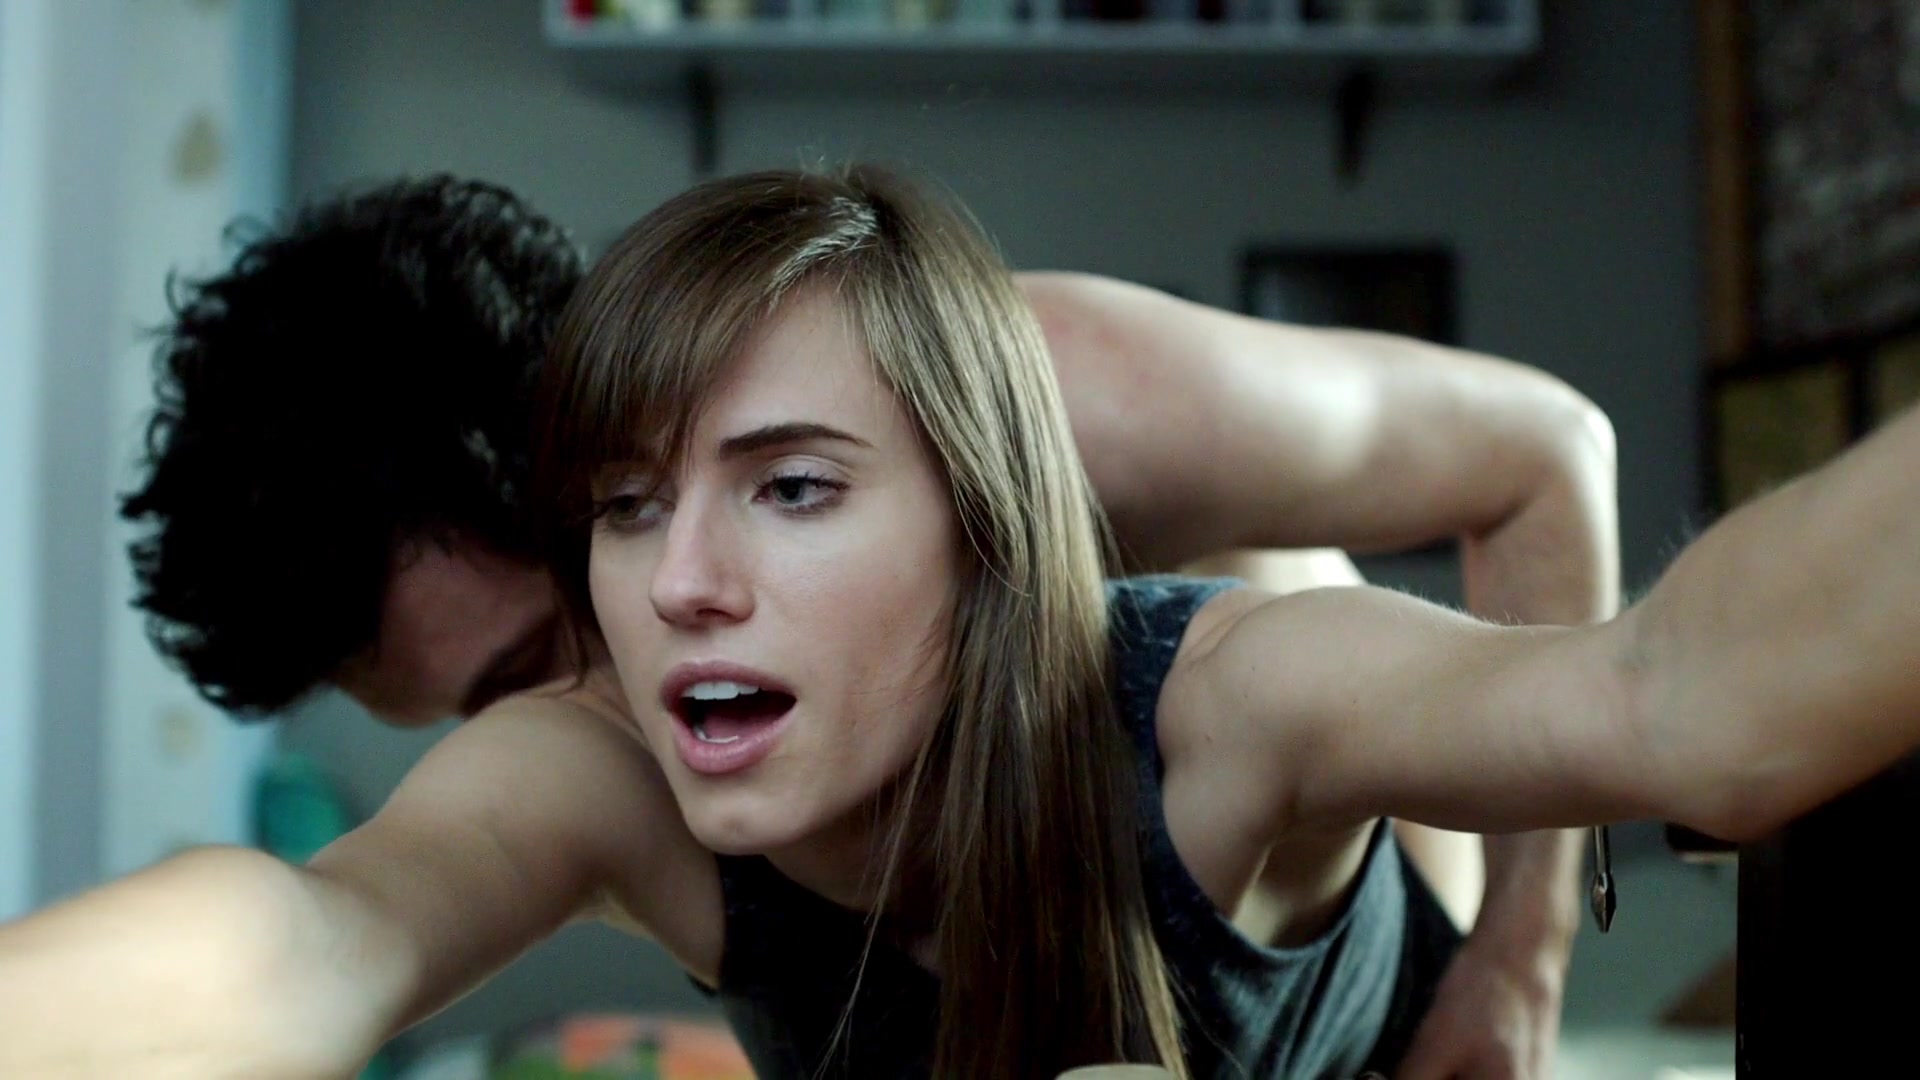 And in this scene Allison Williams is leaning over a kitchen sink with her ...